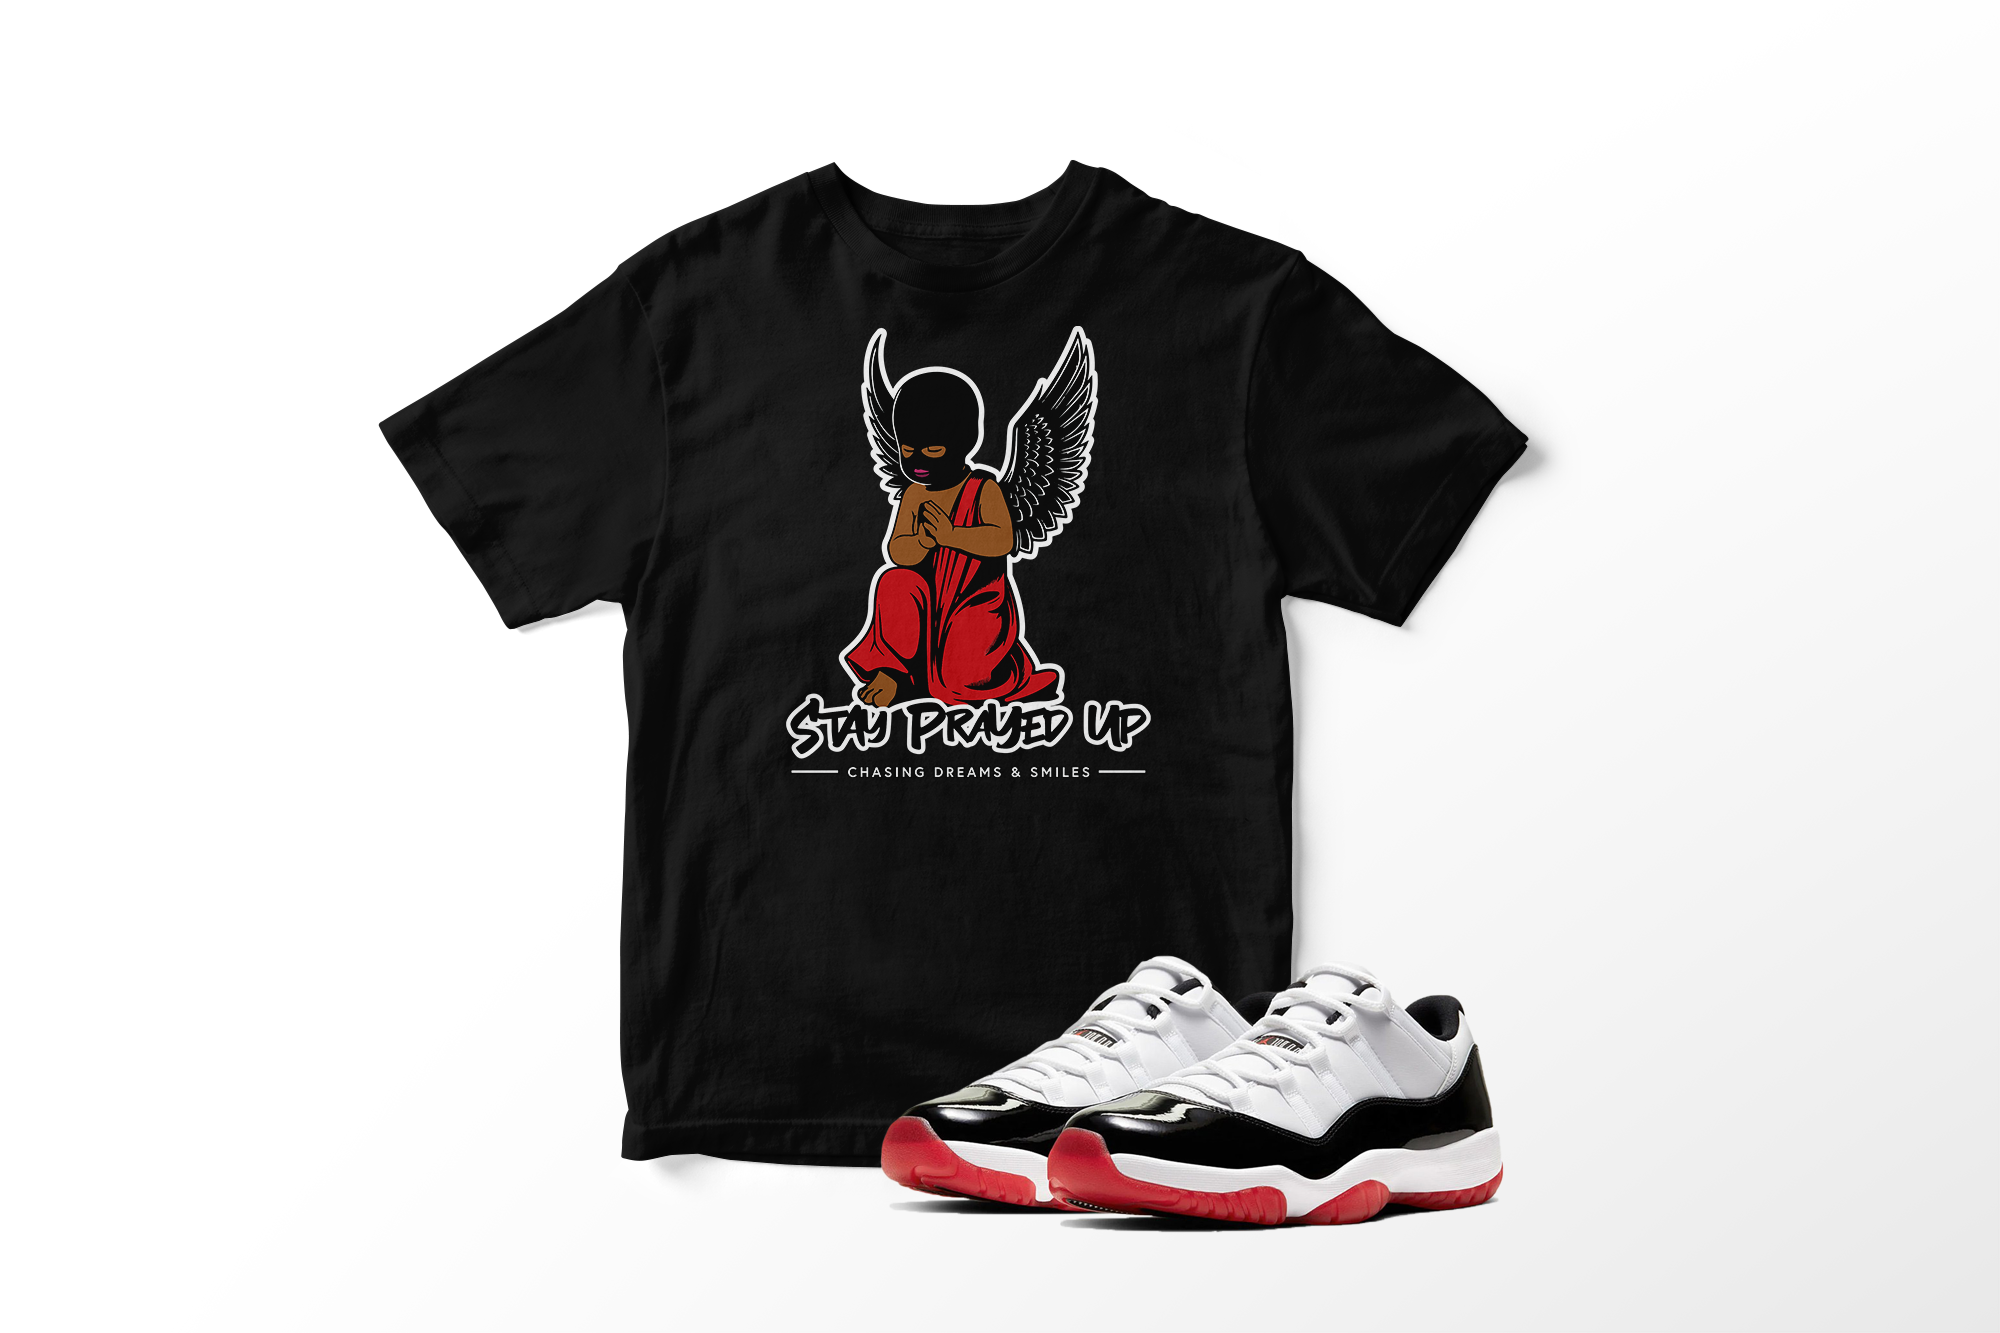 'Stay Prayed Up' in Concord Bred CW Short Sleeve Tee